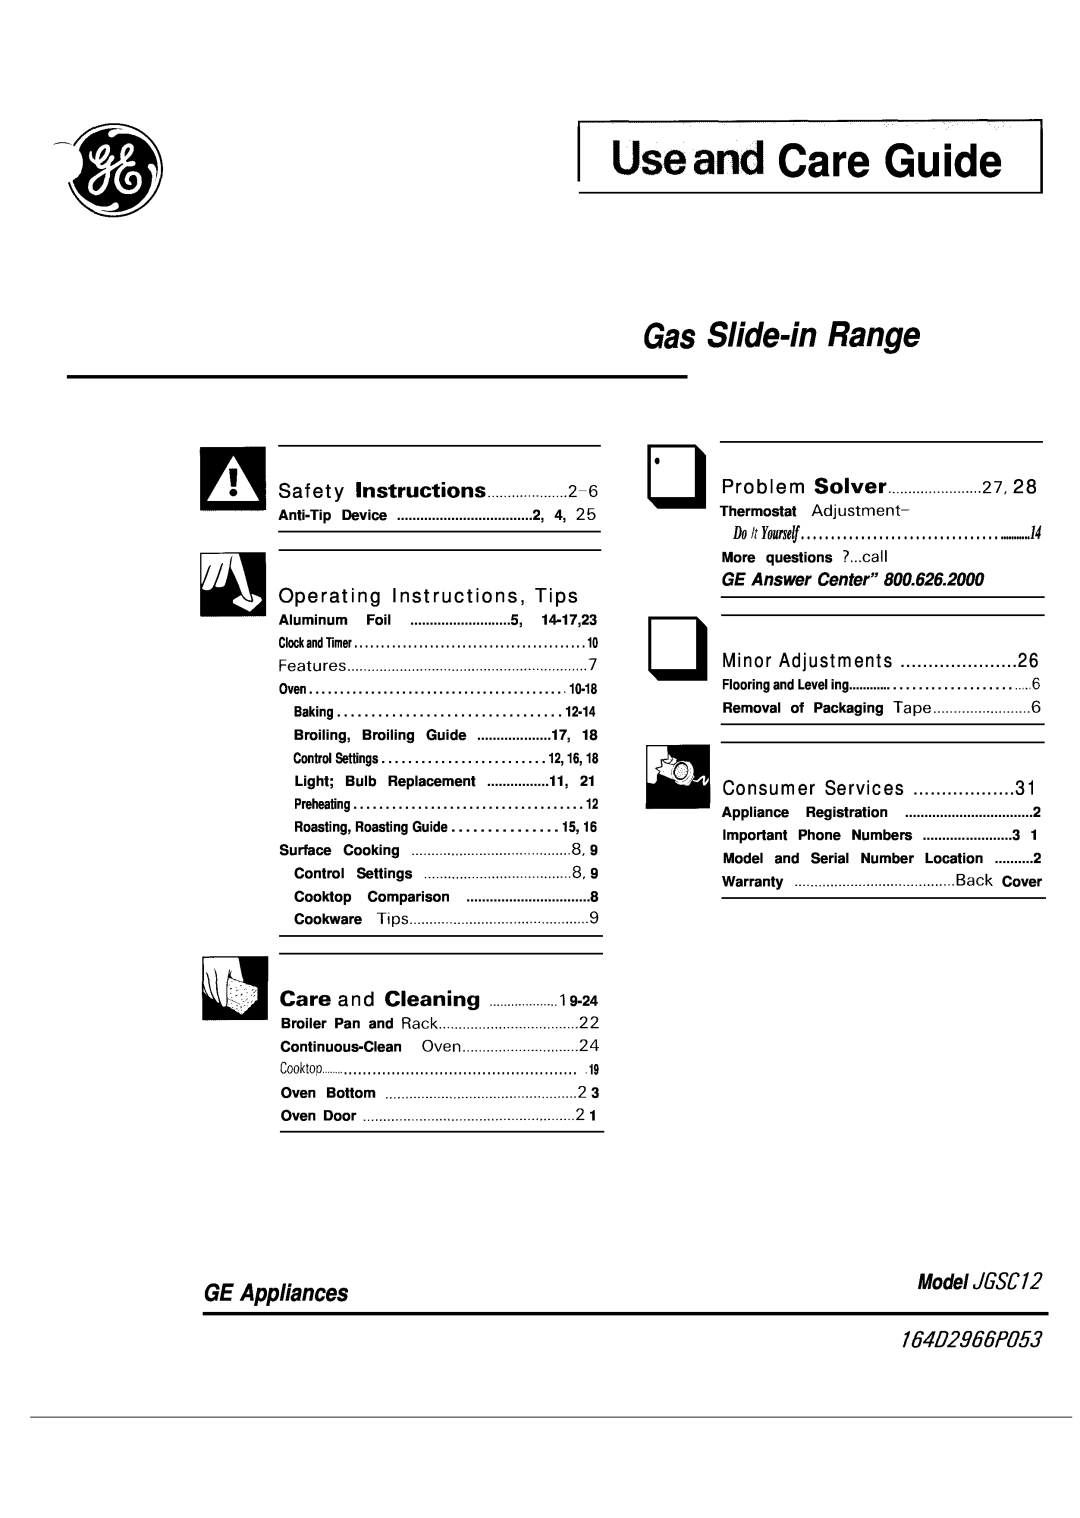 GE 164D2966P053 operating instructions Useand Care Guide, Gas Slide-inRange, GE Appliances, Operating Instructions, Tips 